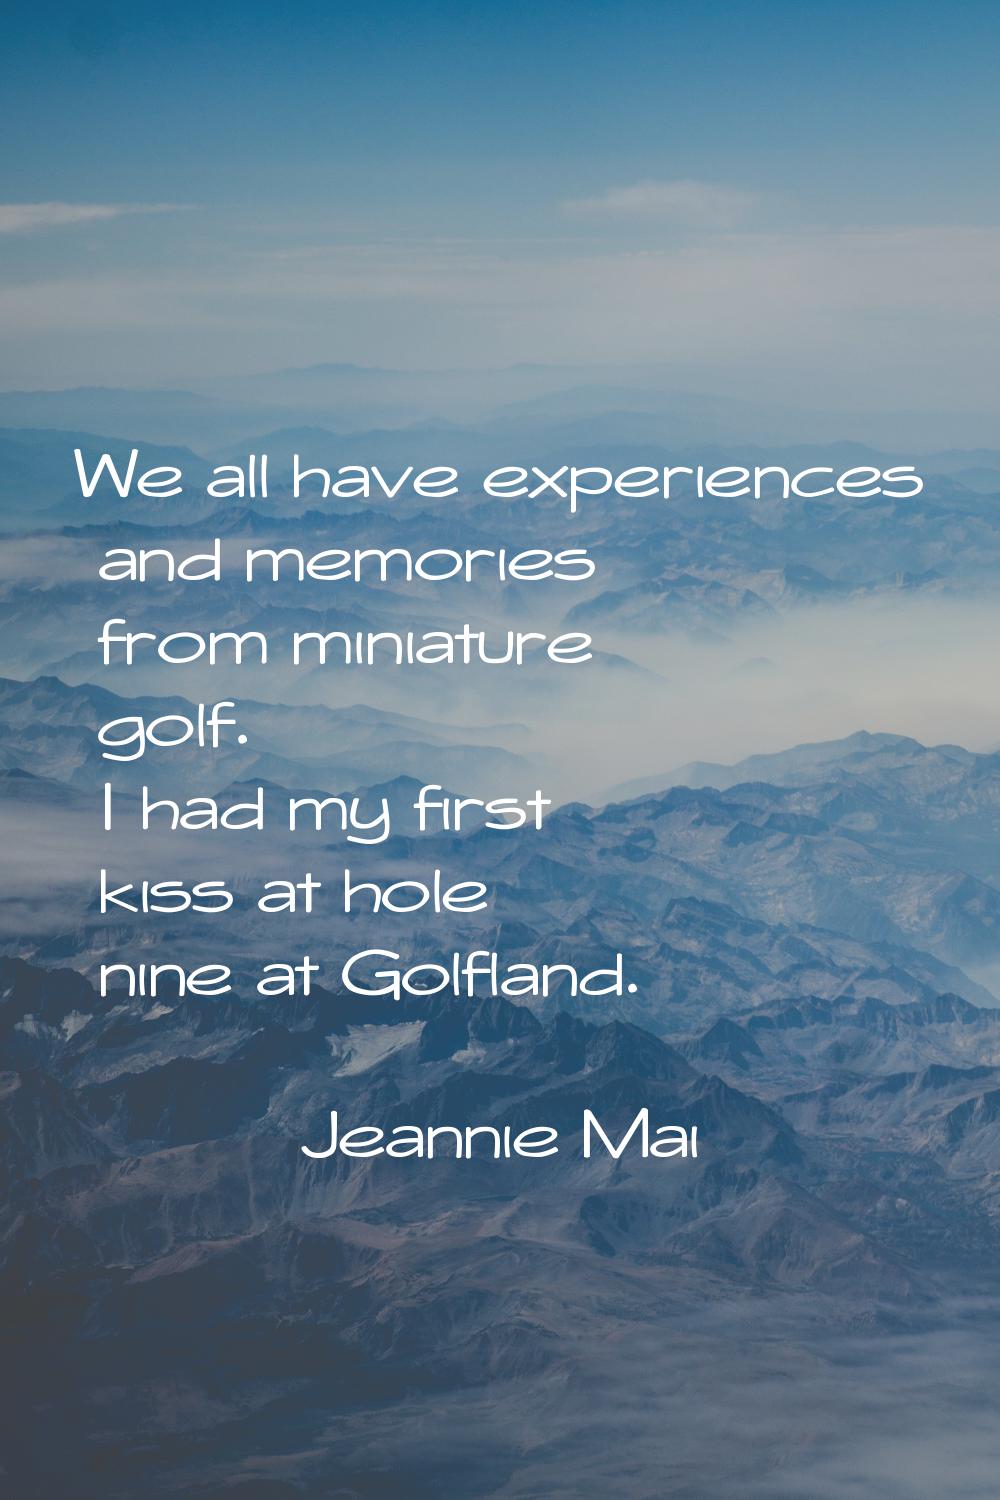 We all have experiences and memories from miniature golf. I had my first kiss at hole nine at Golfl